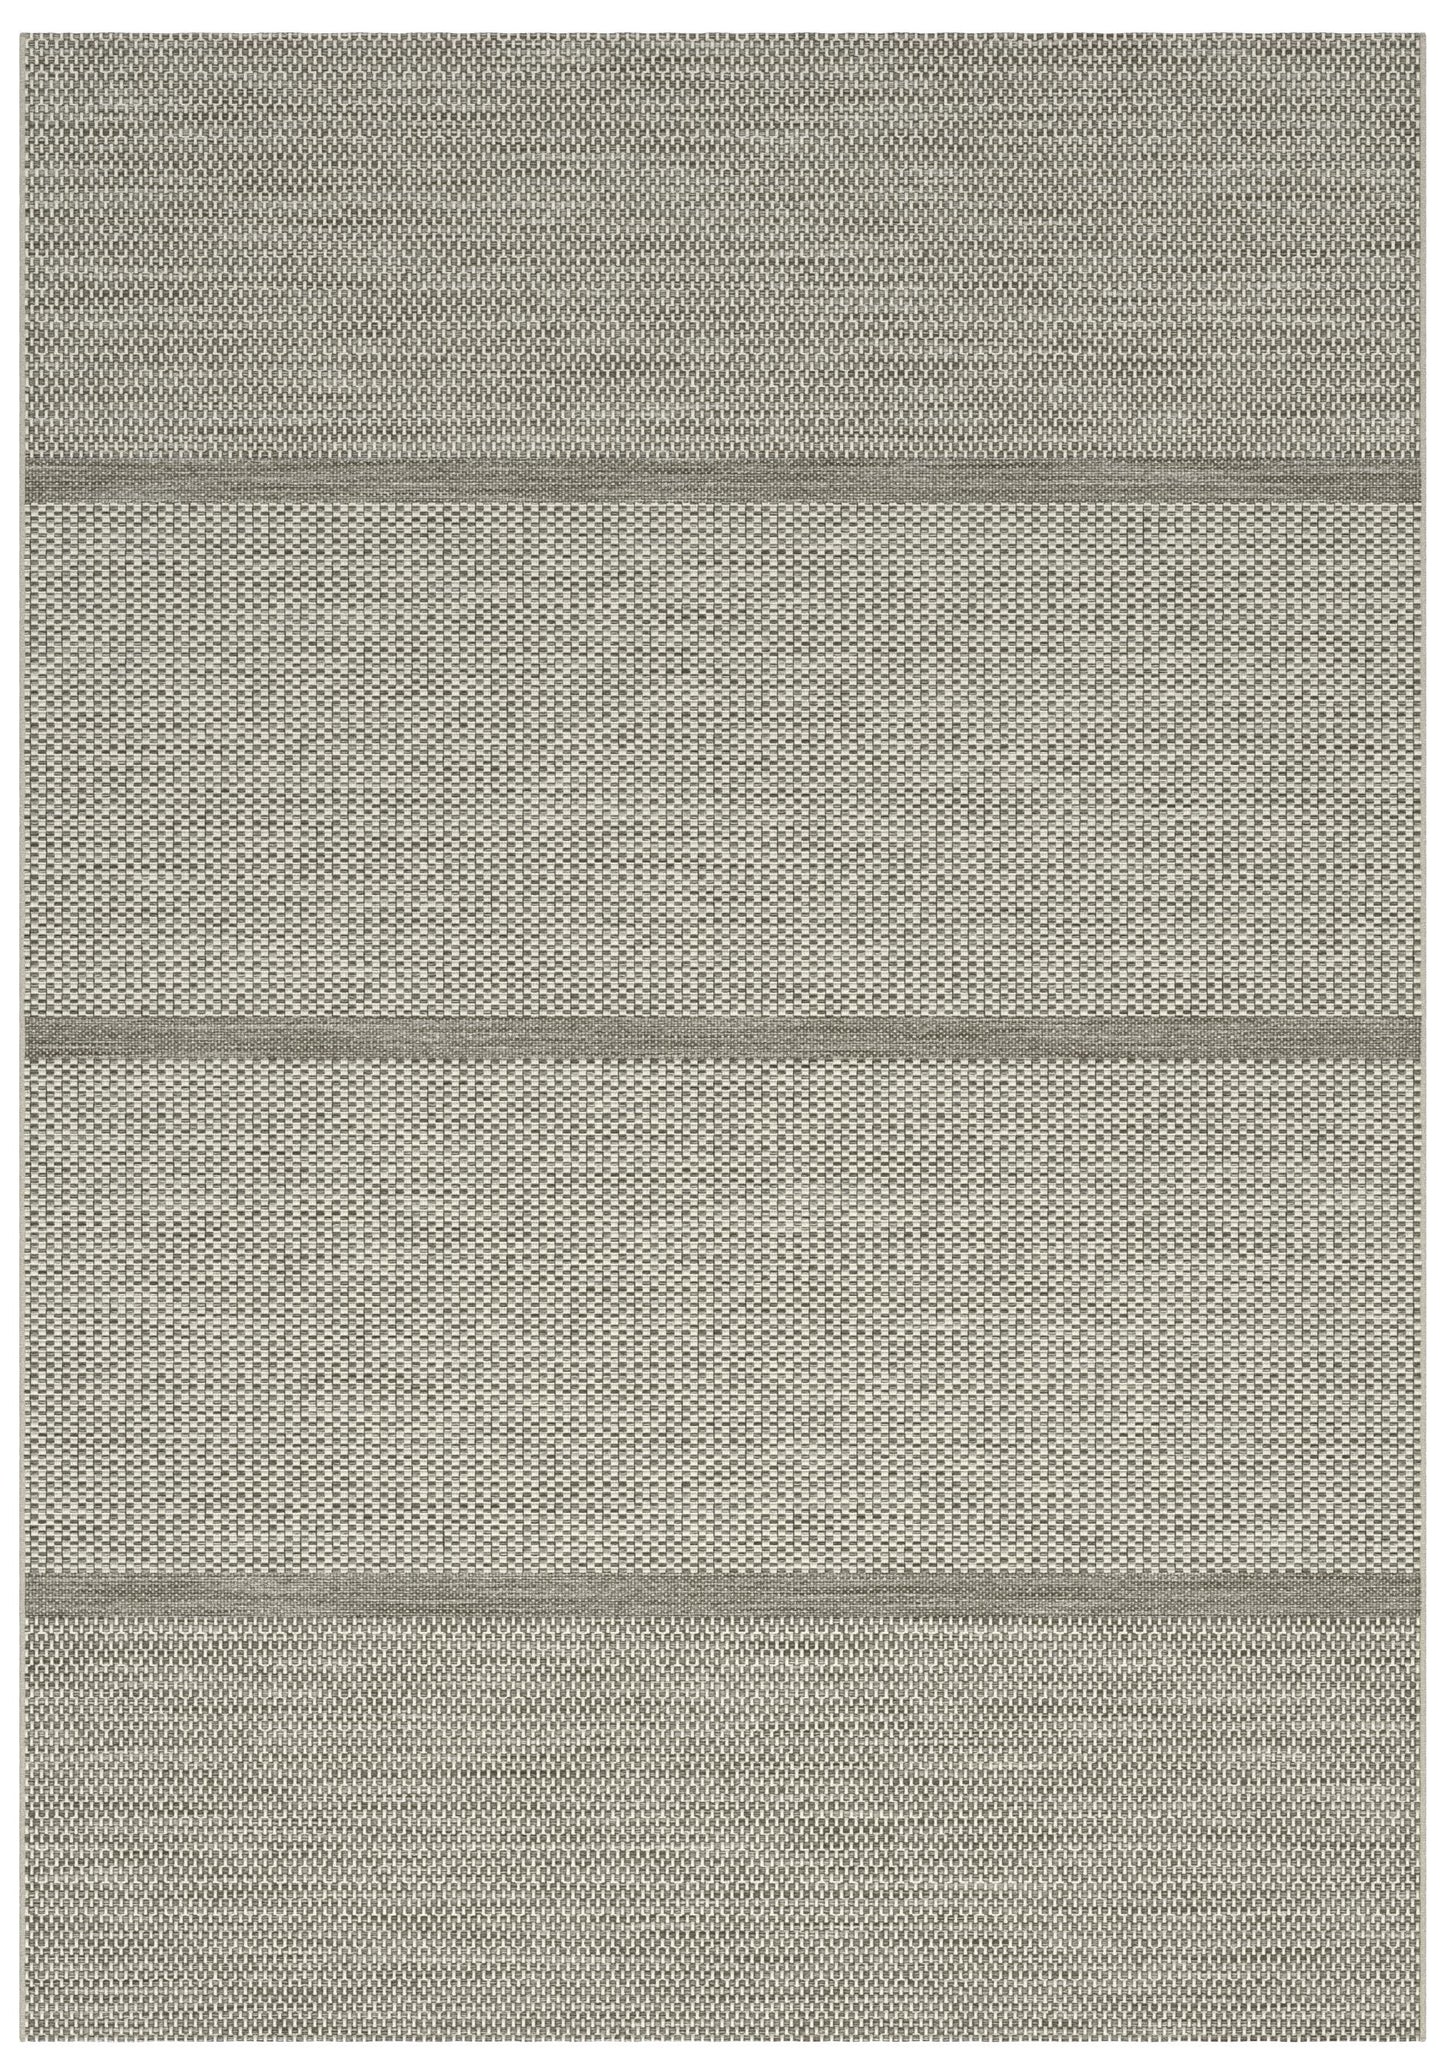 5X8 Area Rug, Striped Neutral Beige and White, Linen Indoor / Outdoor, Polypropylene